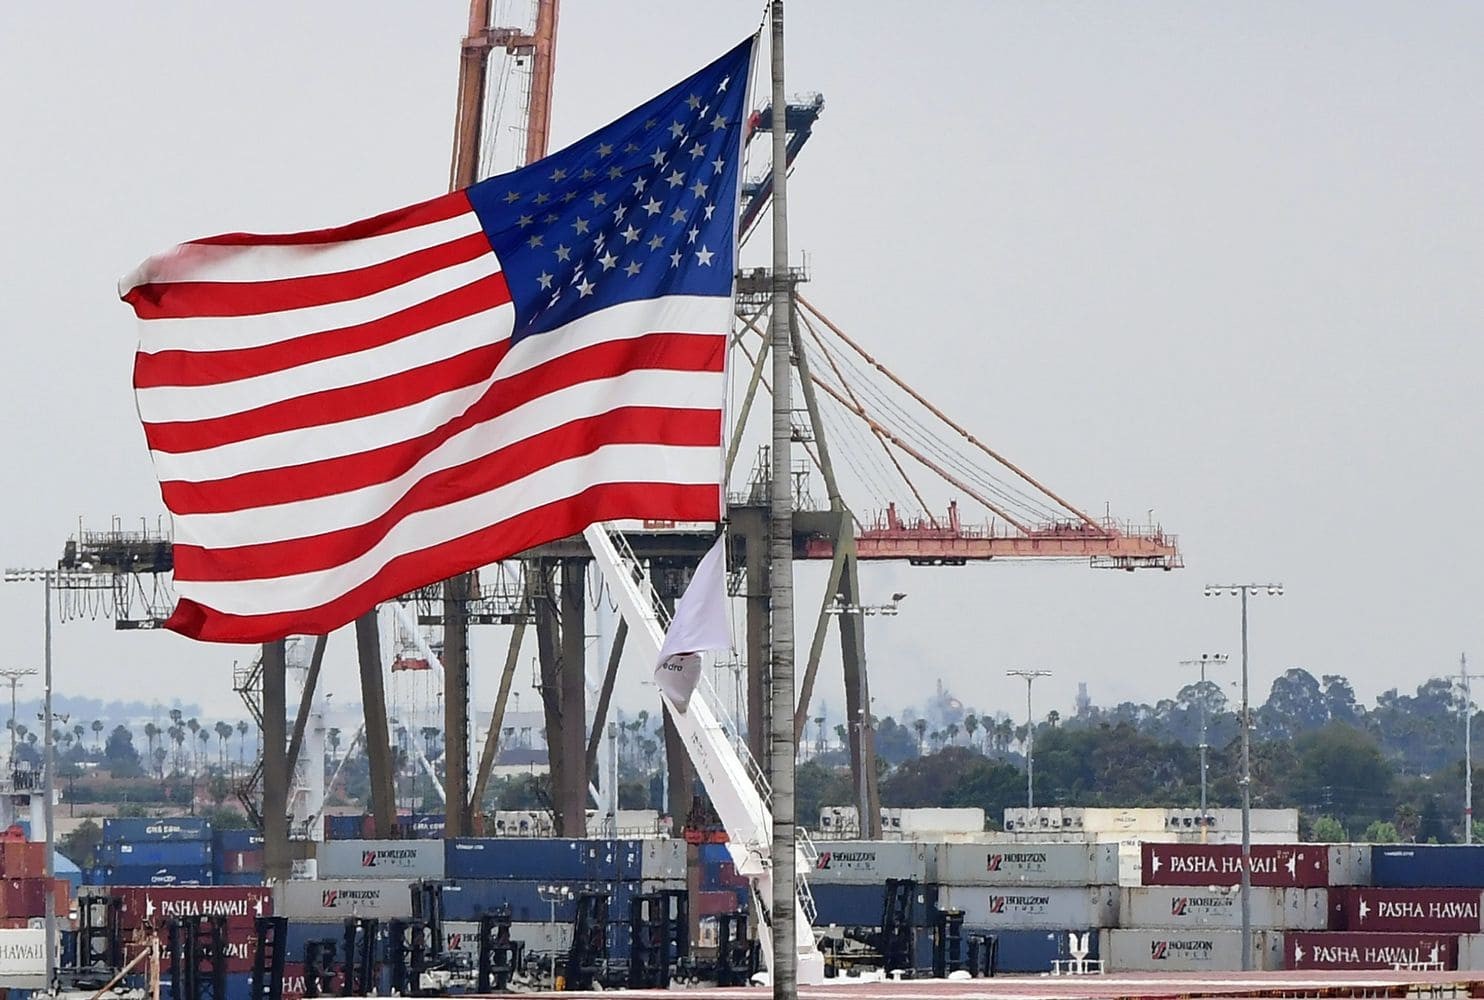 American flag flying over a shipping port with crane and shipping containers in background